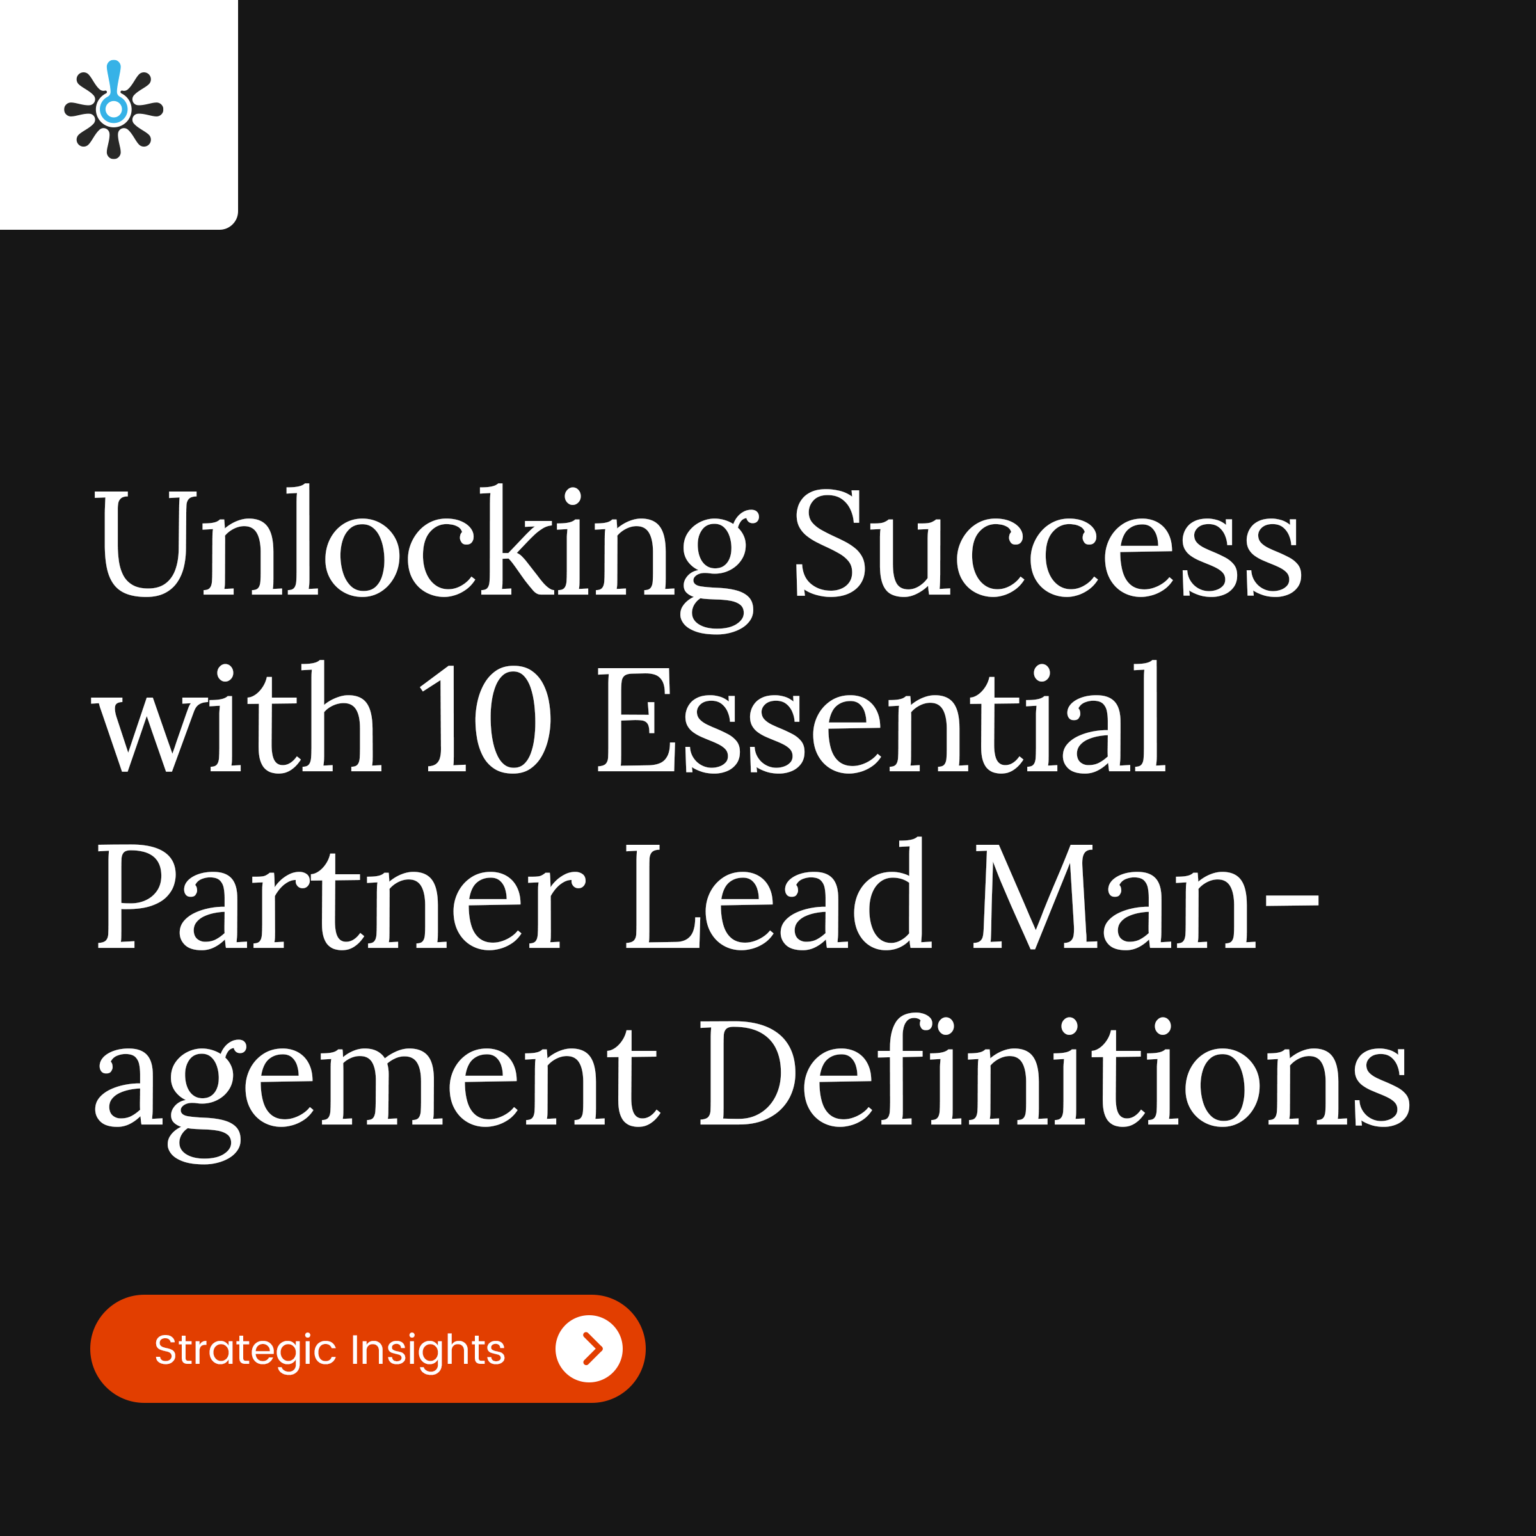 Title Page Reading "Unlocking Success with 10 Essential Partner Lead Management Definitions?"